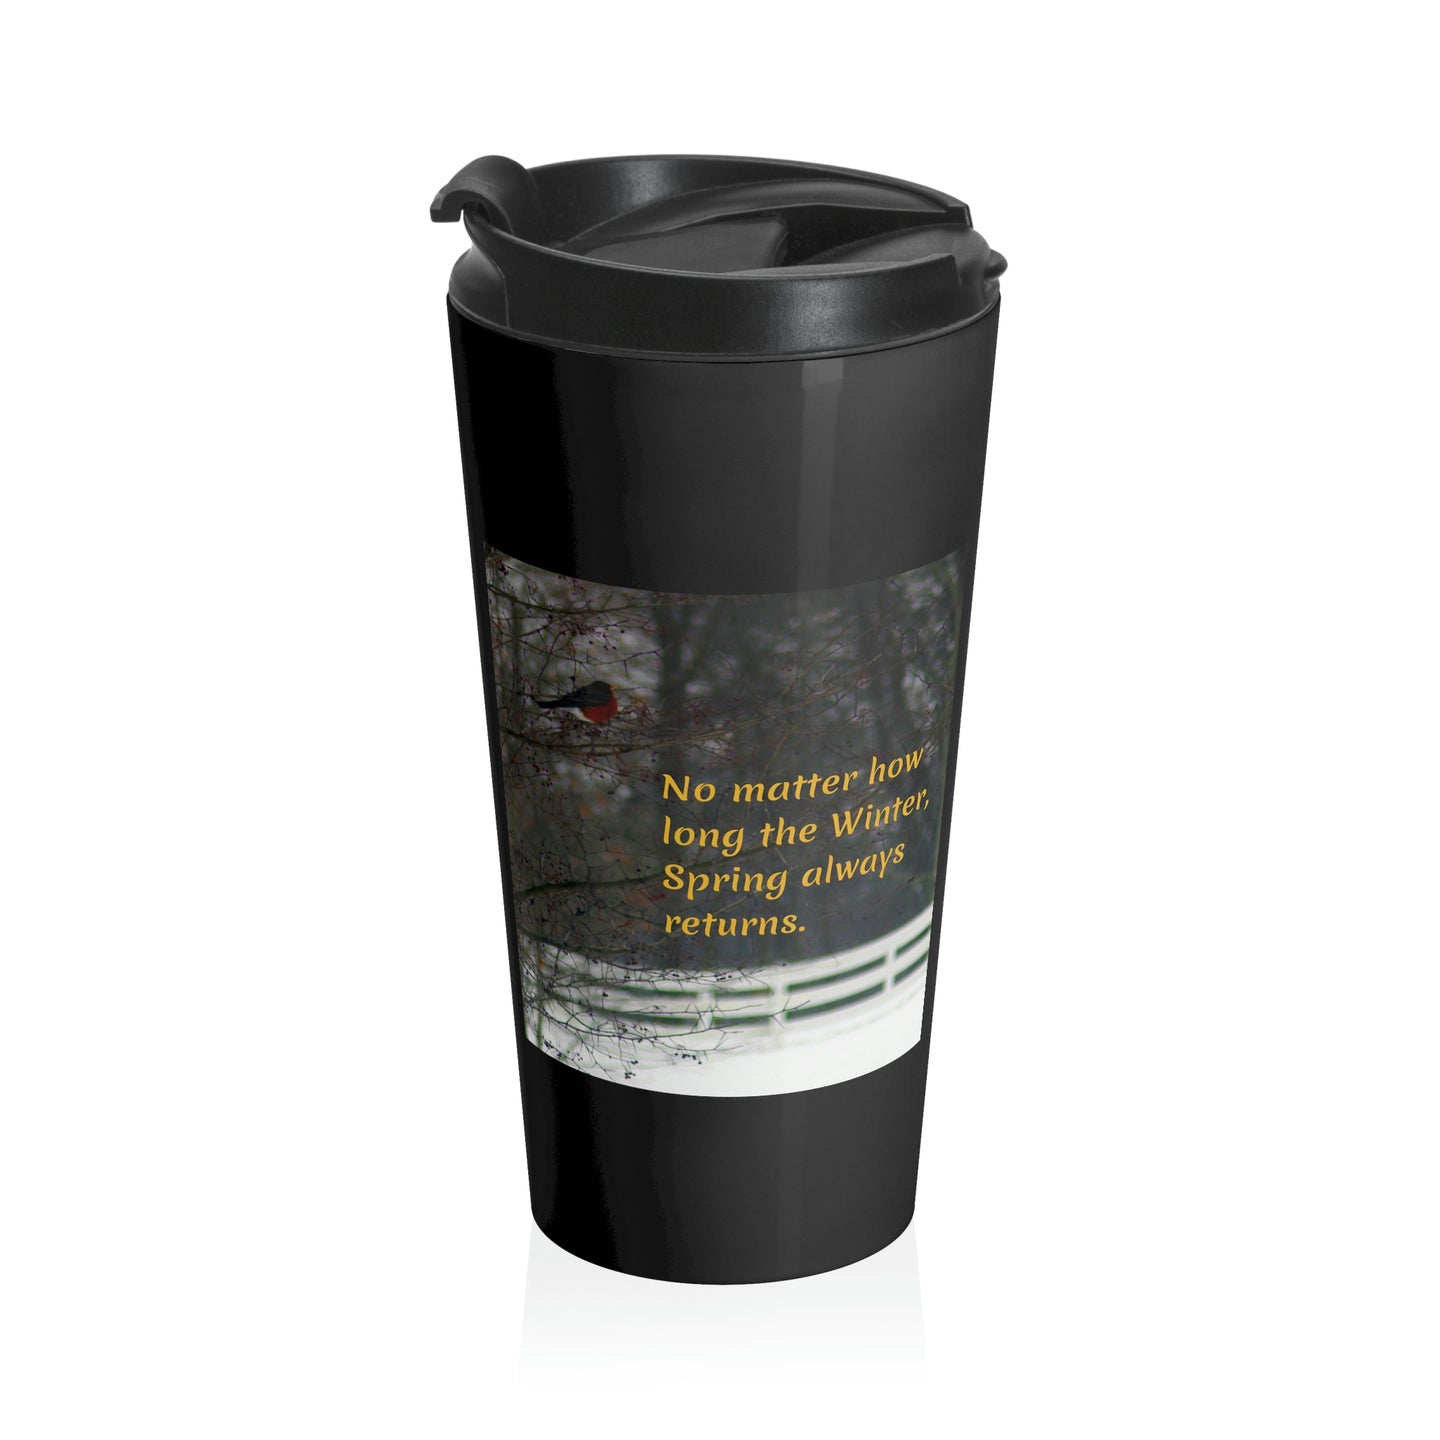 No matter how long the Winter, Spring always returns. | Inspirational Motivational Quote Stainless Steel Travel Mug | 15oz | Black | Robin Snow Winter